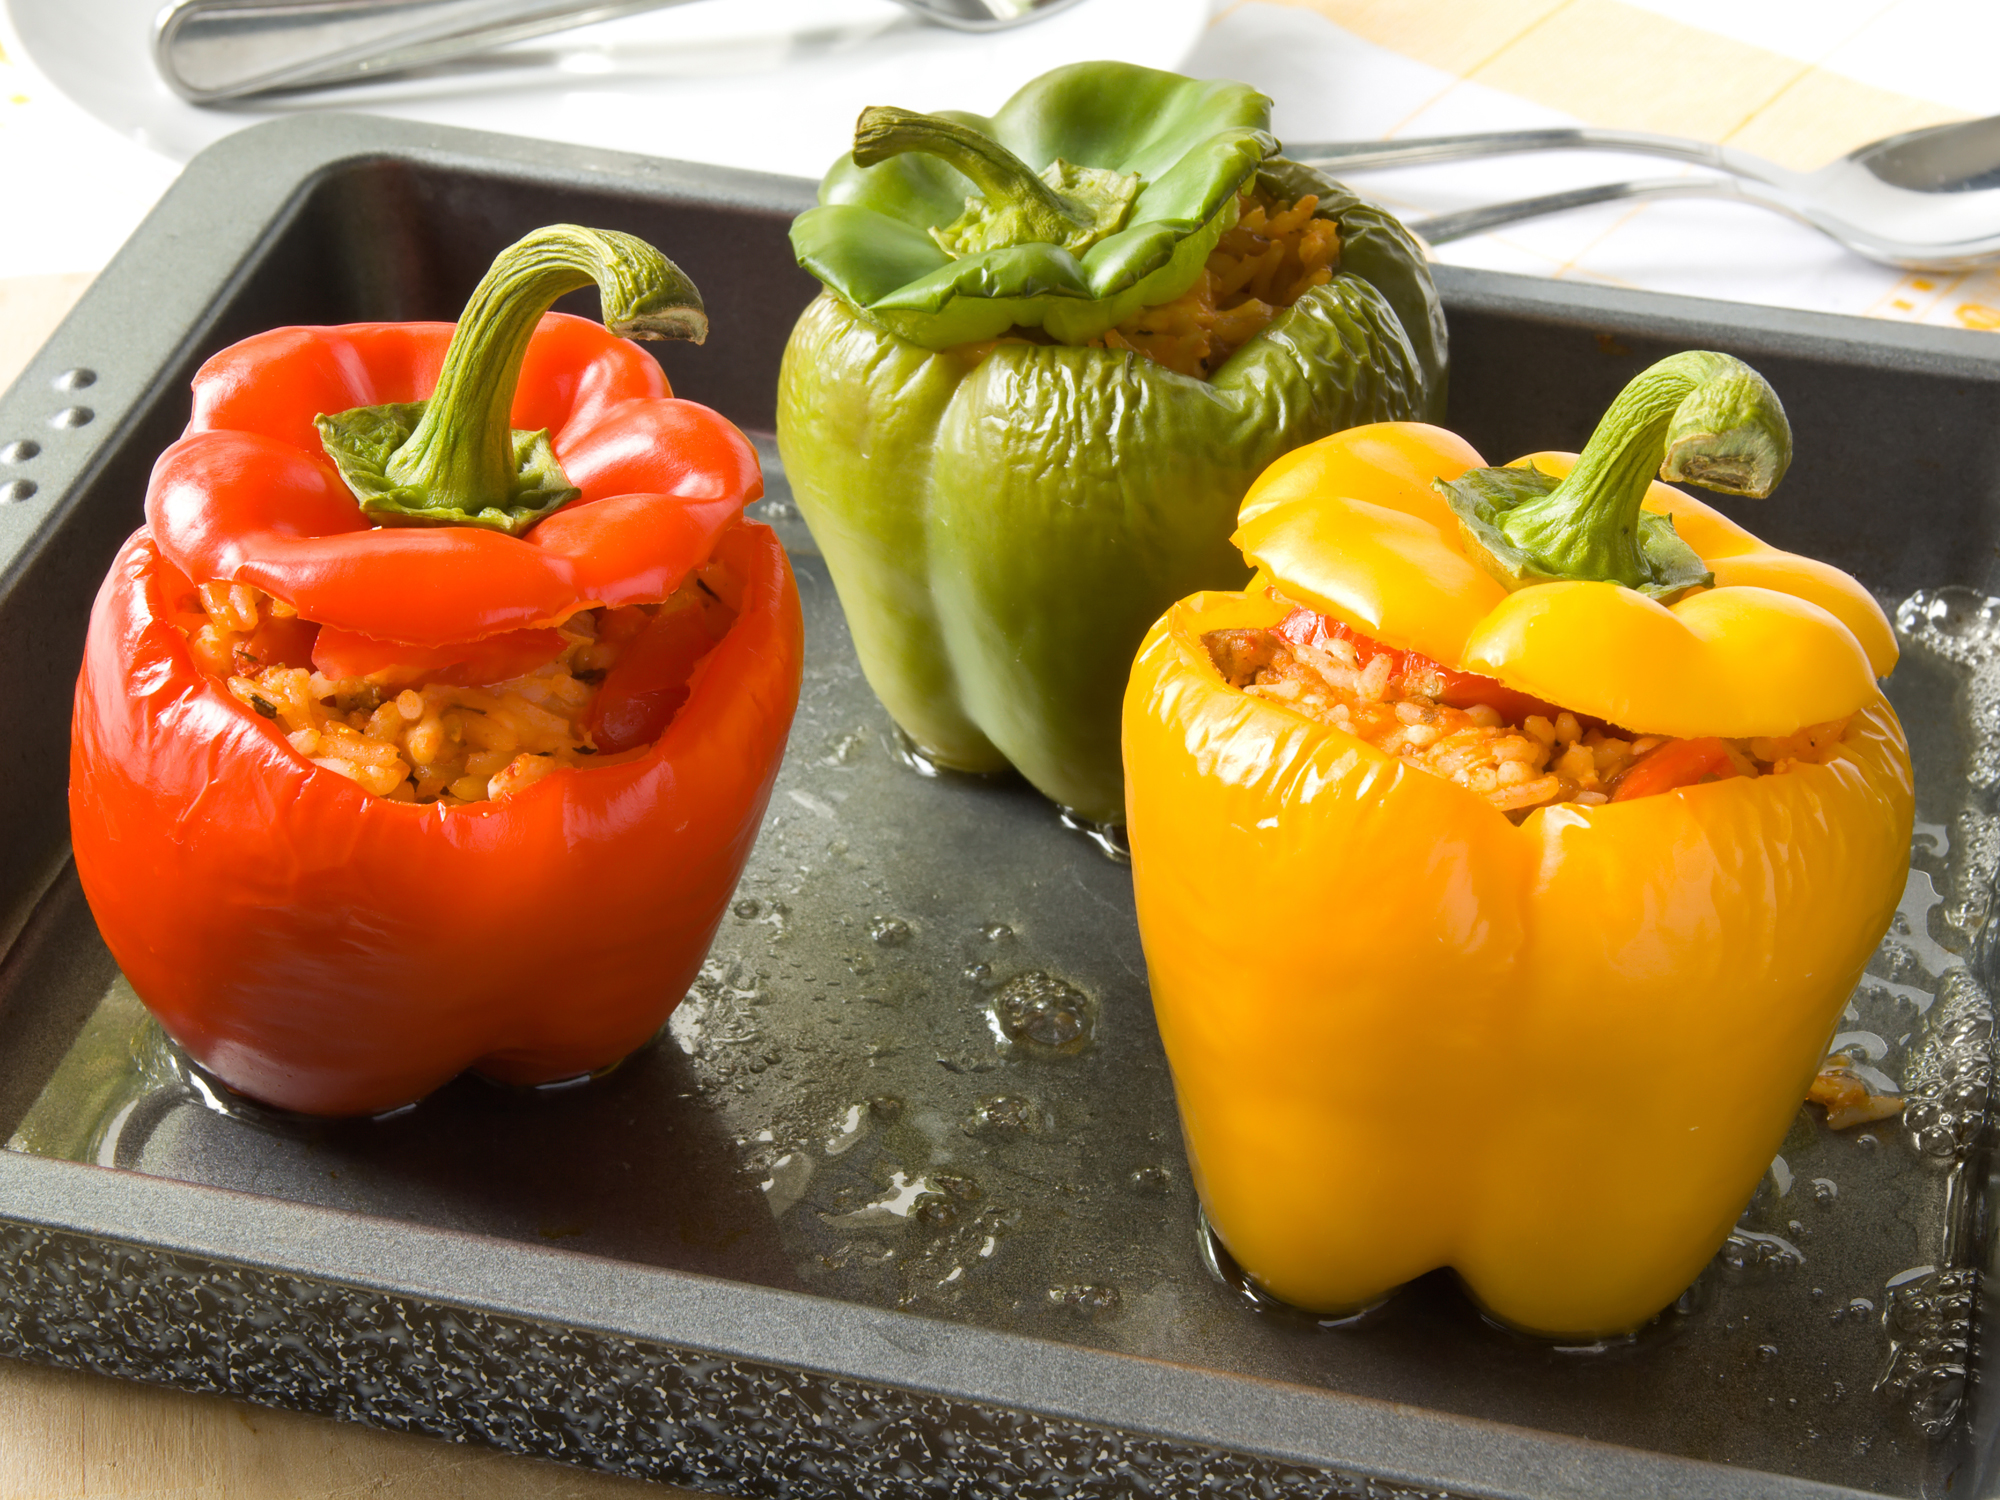 In the Kitchen with Kelley: Quinoa stuffed bell peppers